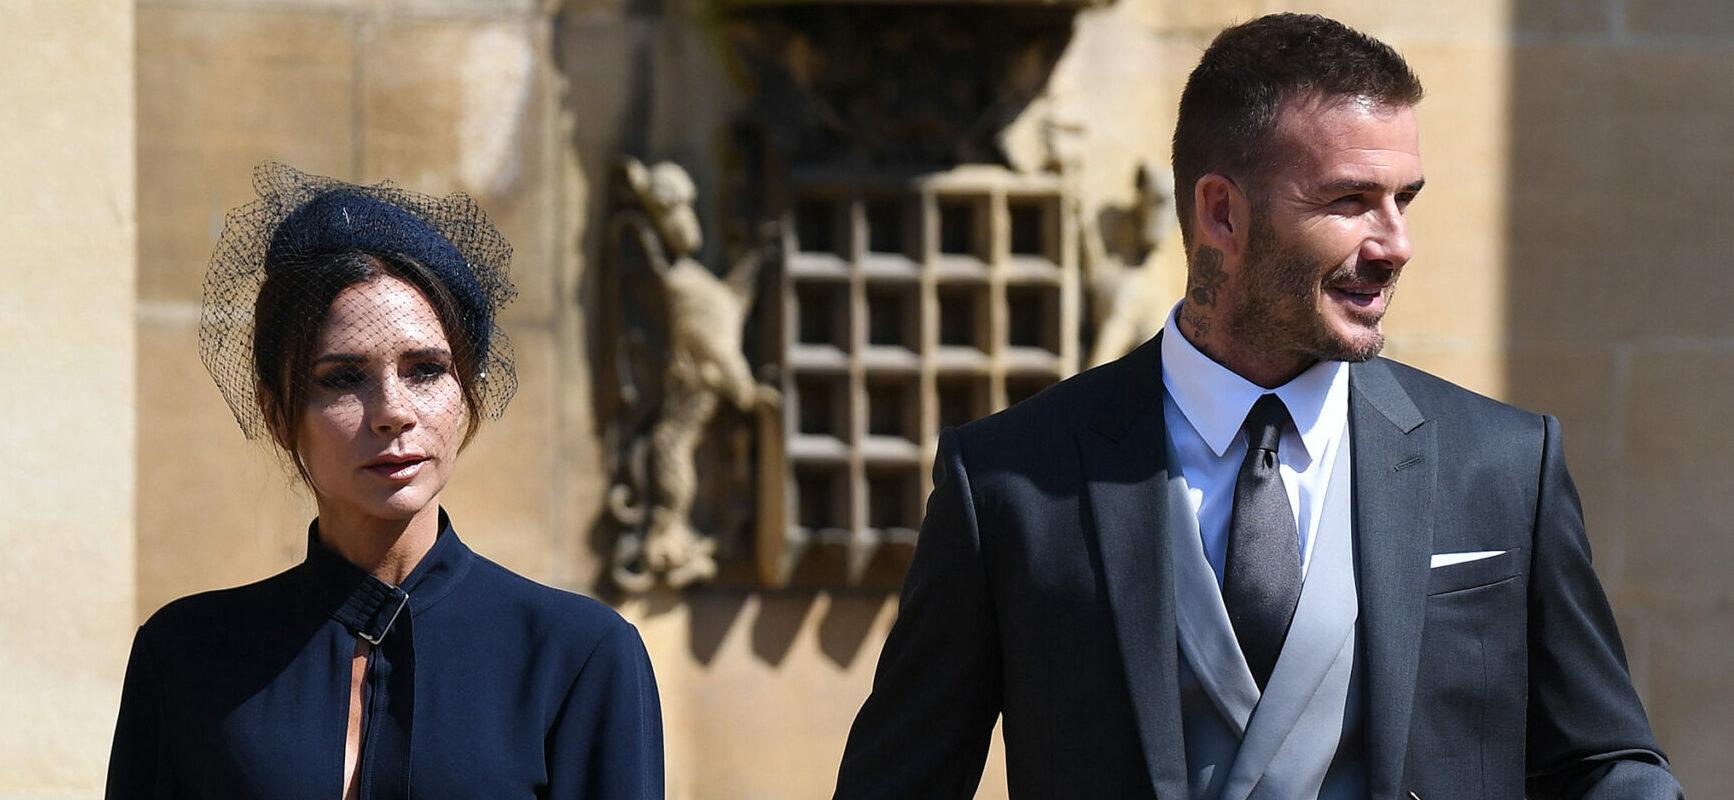 Victoria and David Beckham attend the Royal Wedding of Prince Harry to Meghan Markle at St George's Chapel